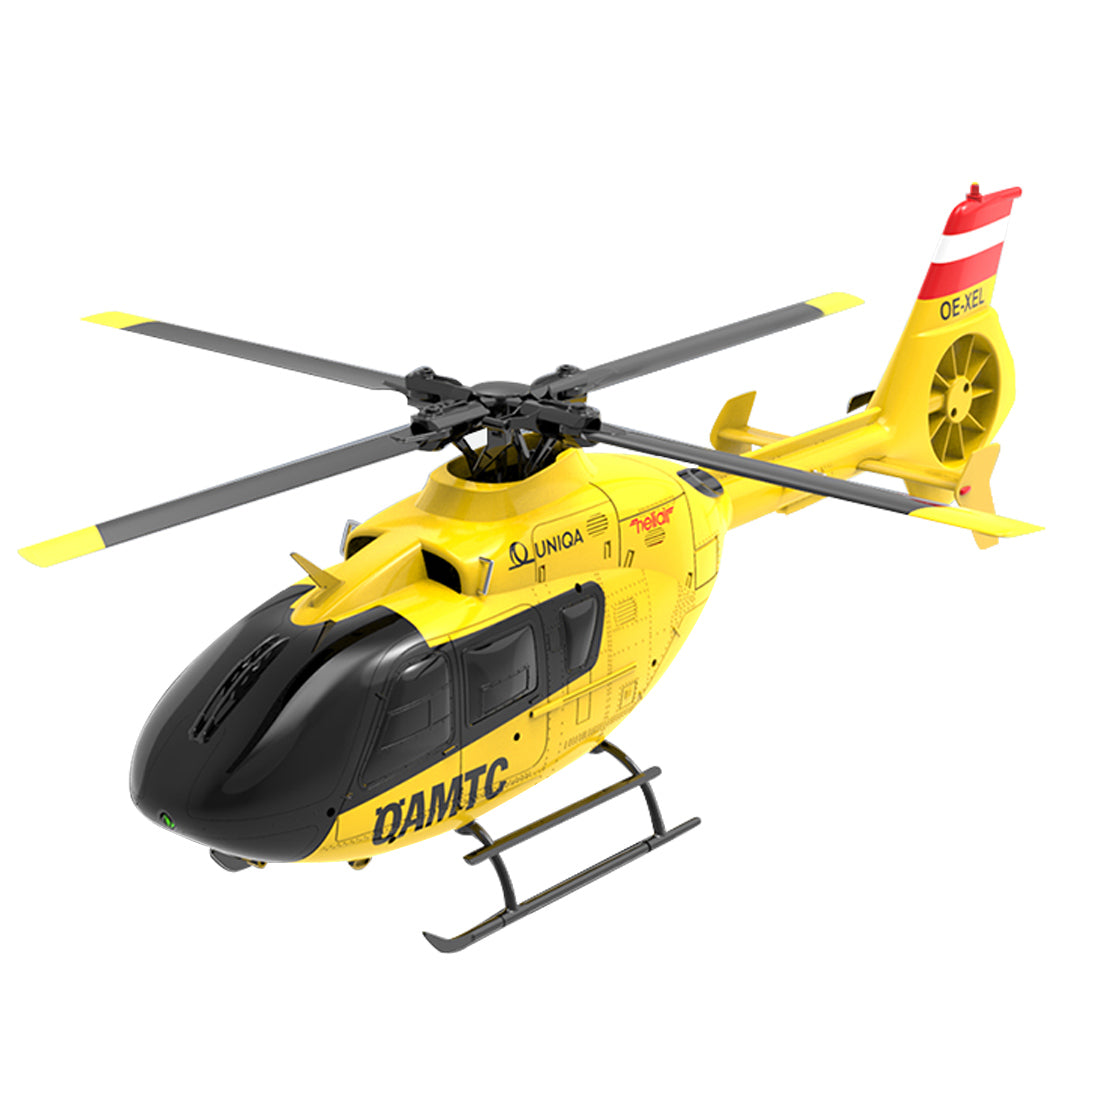 YU XIANG F06 1/36 Scale EC-135 2.4G 6-Channel RC Direct-Drive Brushless Helicopter 3D Aerobatic Aircraft Model enginediyshop